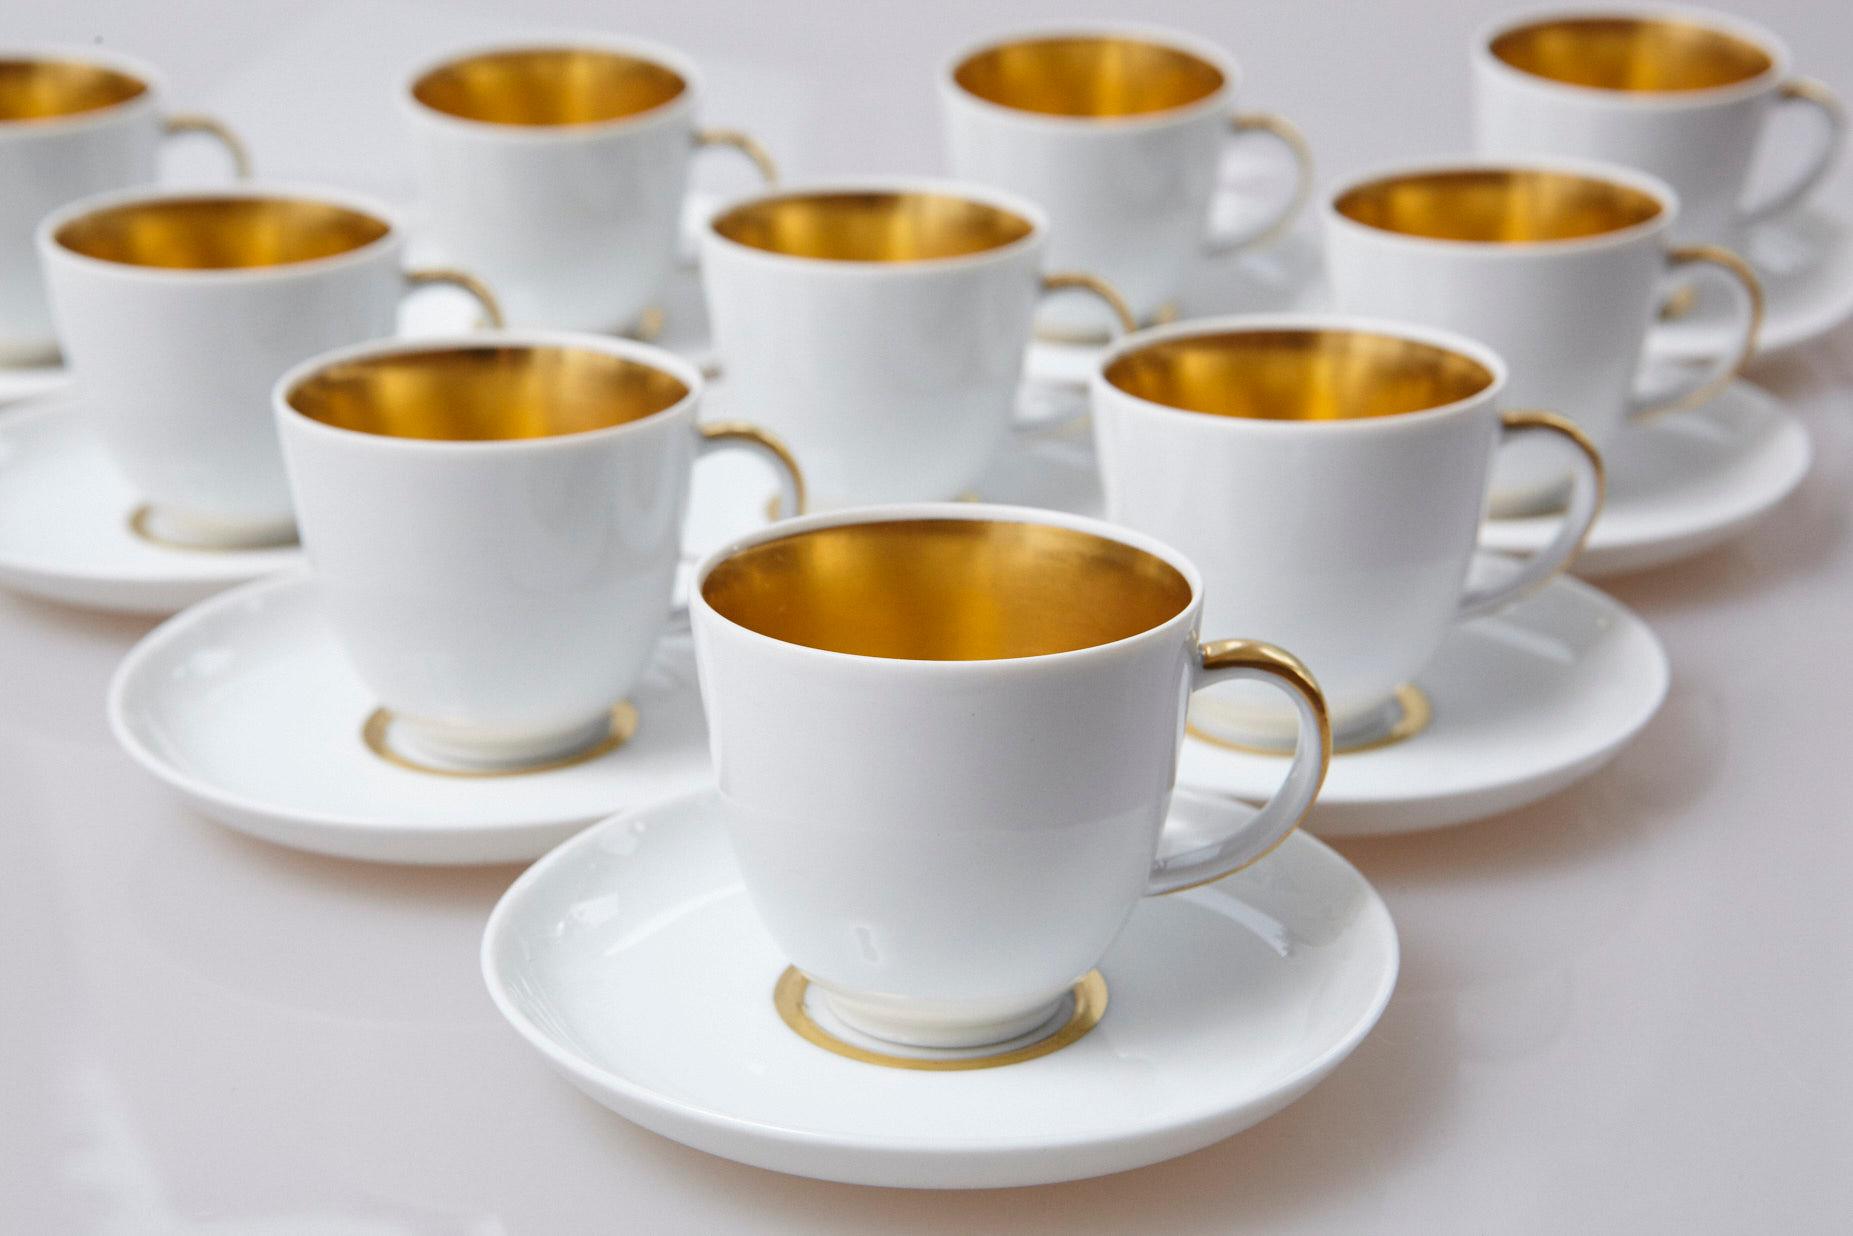 Beautiful set of ten white and 22-karat gold porcelain demitasse or mocca / espresso cups and saucers, with gold interior, gold handles and gold rimmed saucer, by Fürstenberg, Germany.
All stamped and numbered with the blue porcelain stamp F for